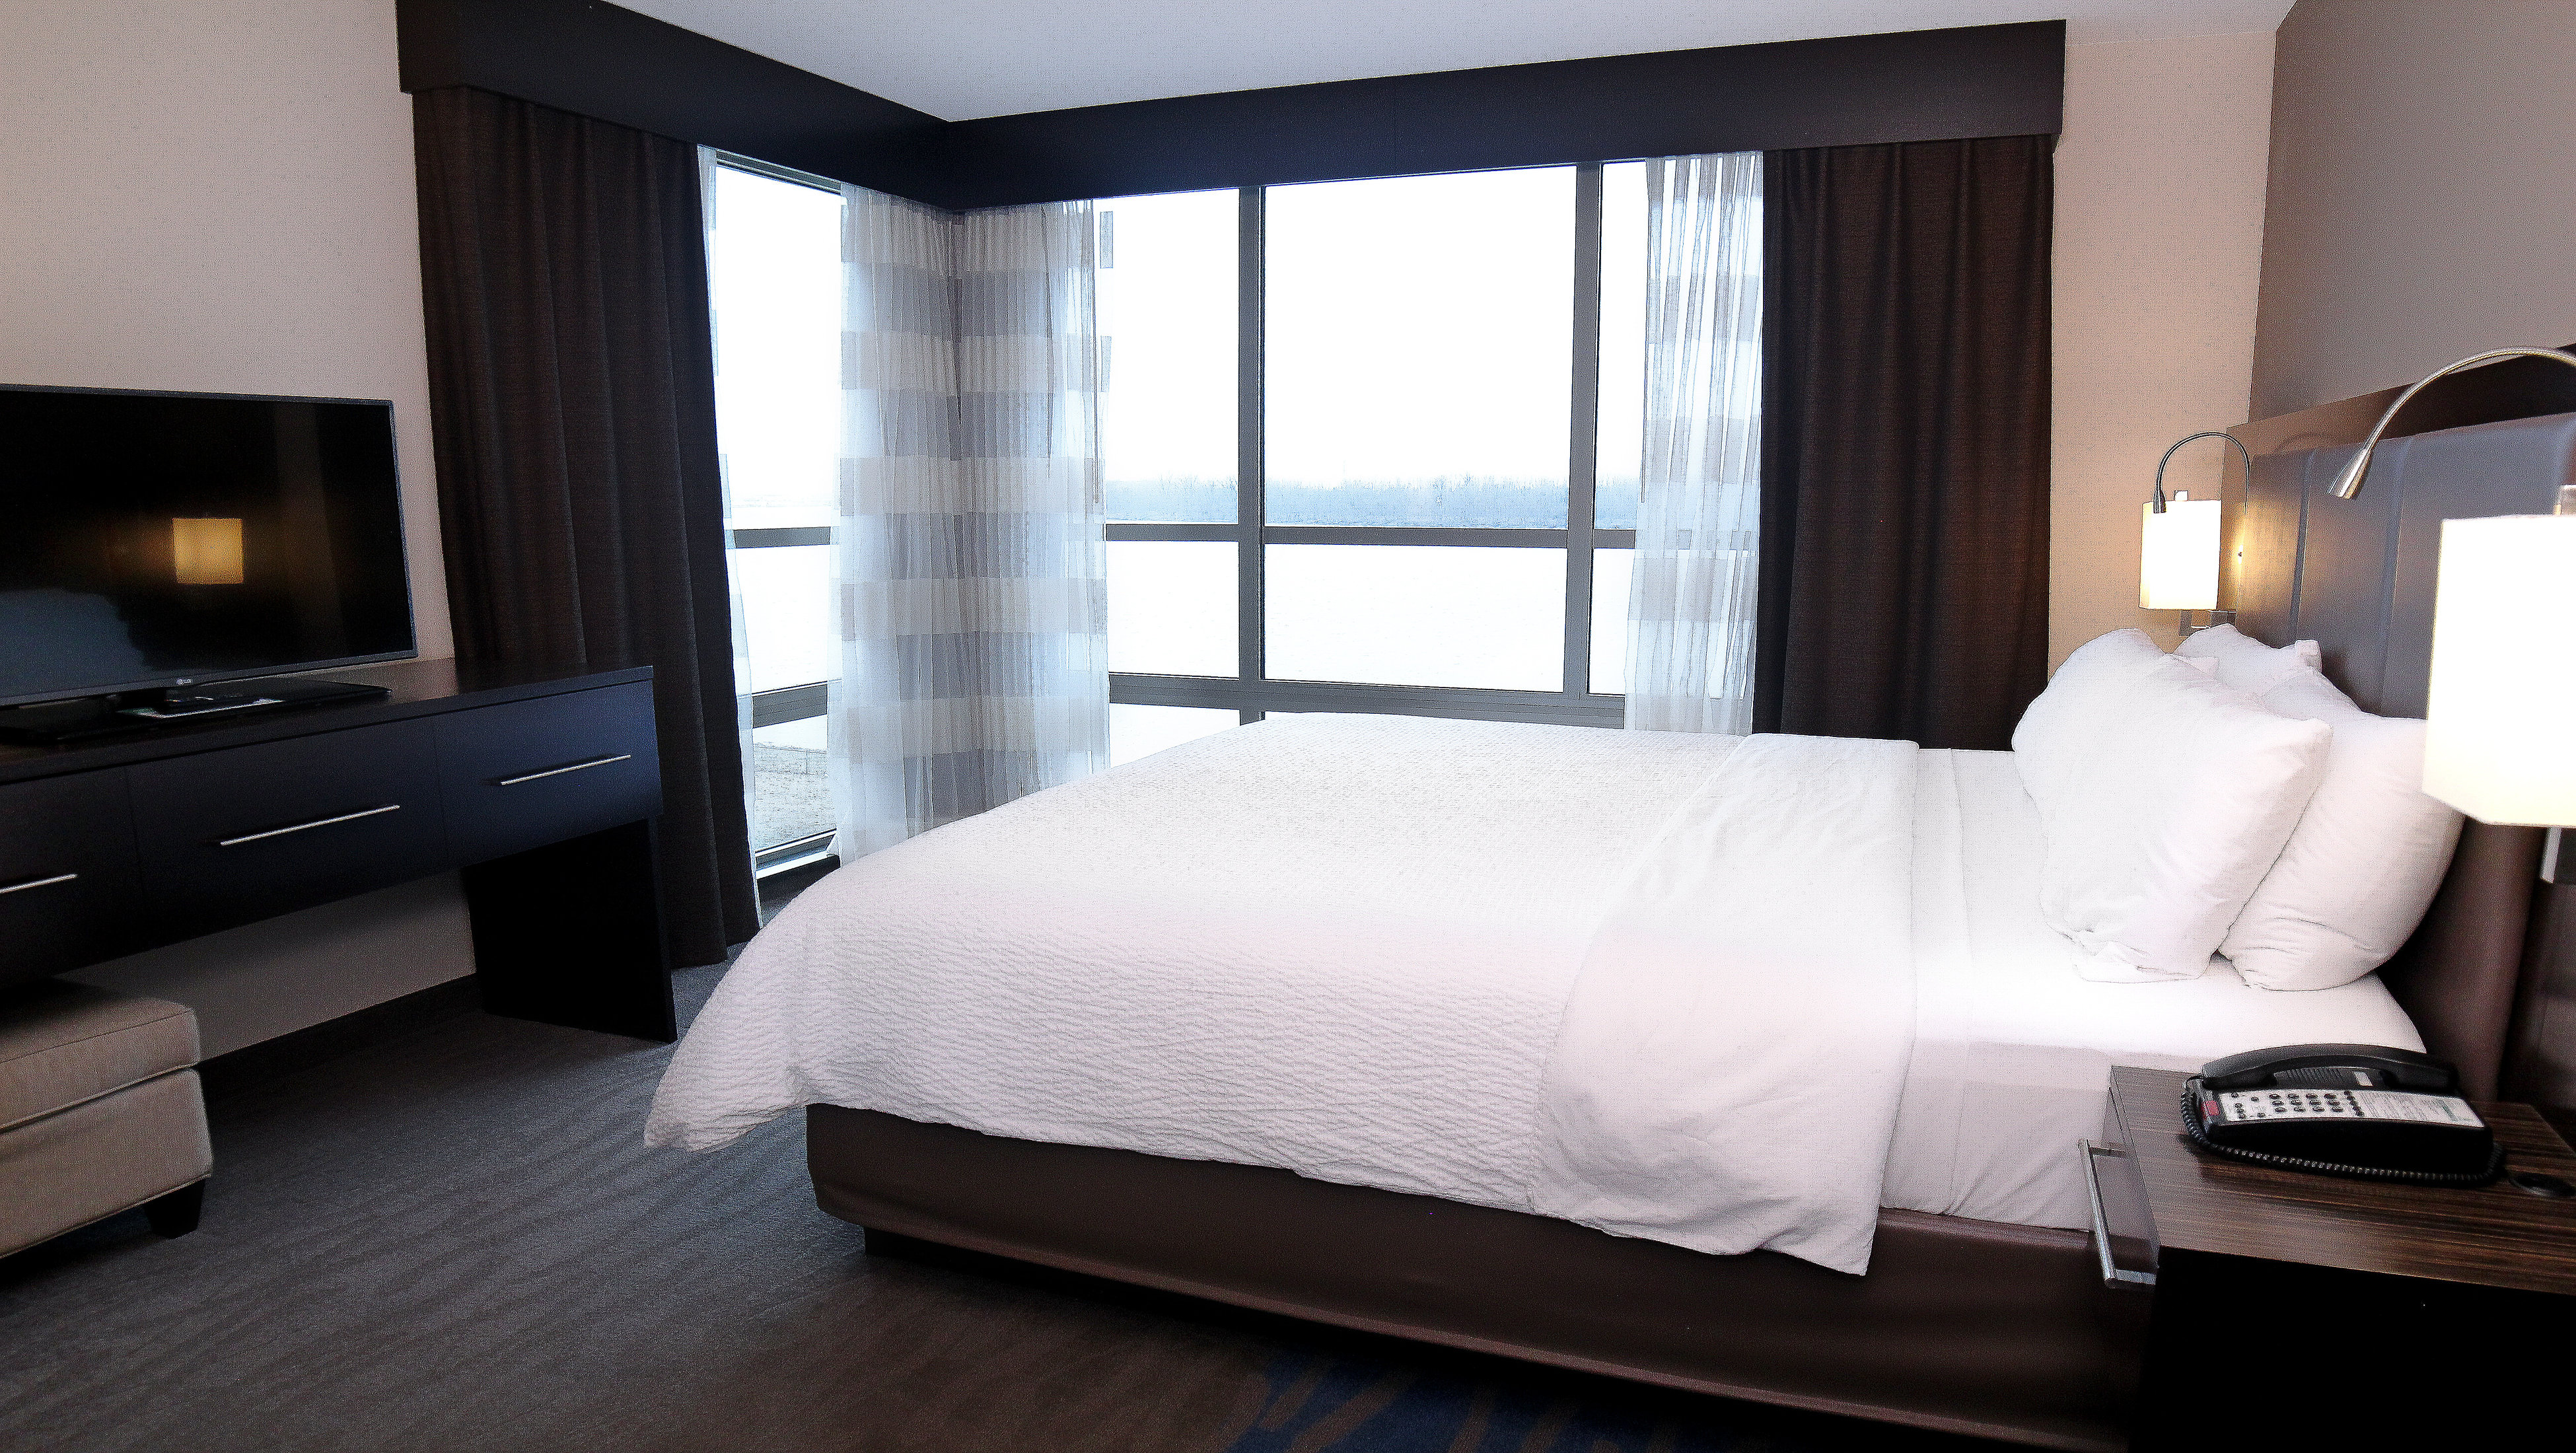 Enjoy the Ohio river in our King Bedroom Suite